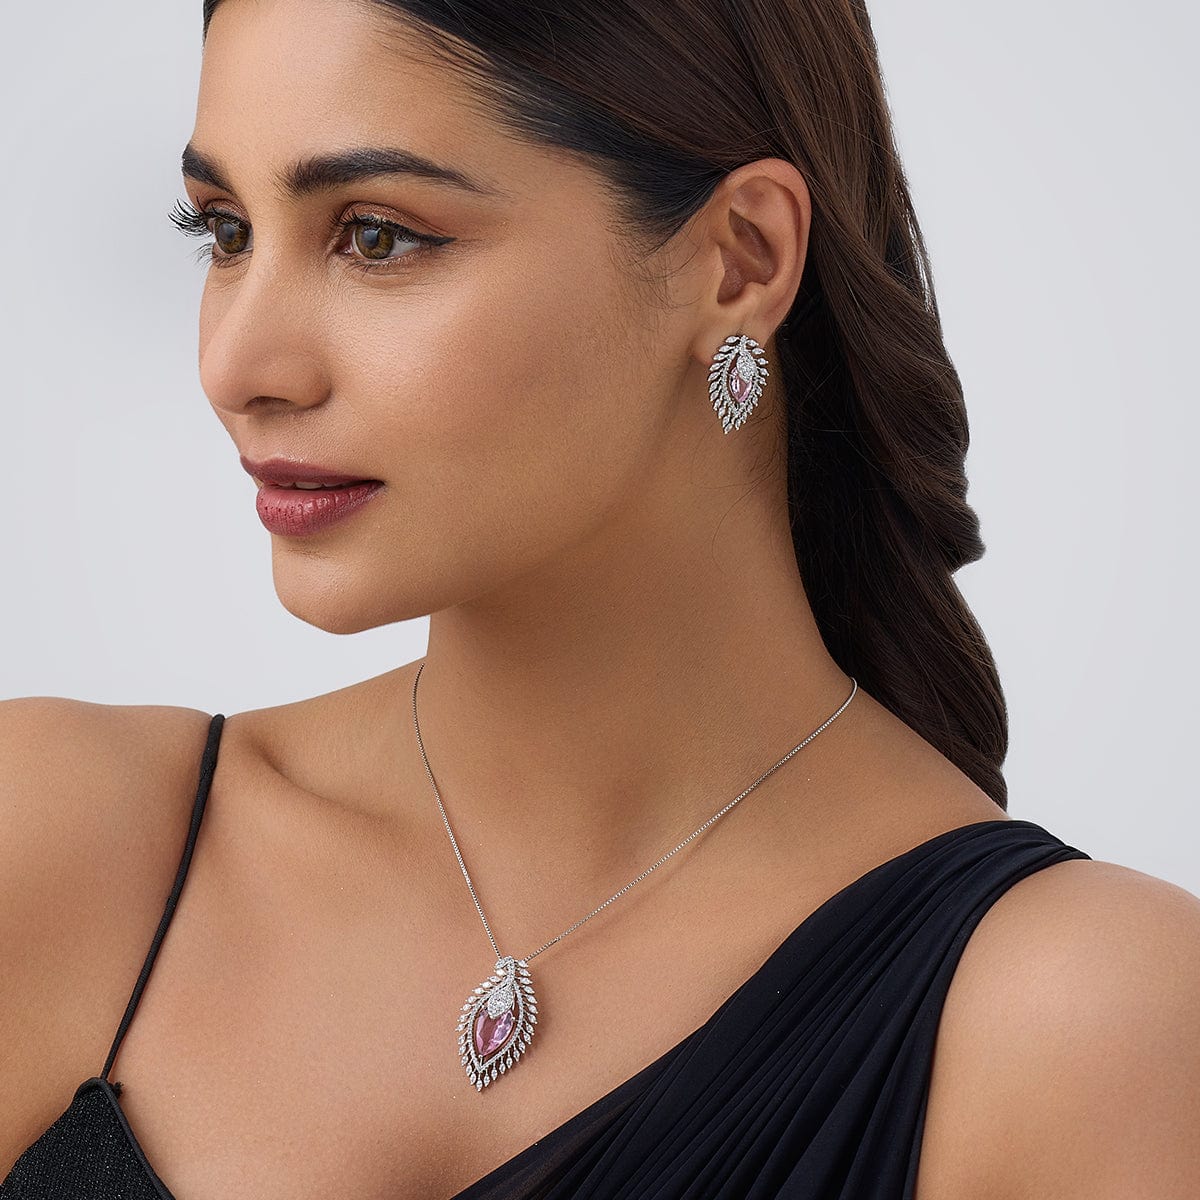 Swarovski Crystal Jewelry Sets, Necklace and Earring Collection, One size,  Crystal, Cubic Zirconia : Buy Online at Best Price in KSA - Souq is now  Amazon.sa: Fashion